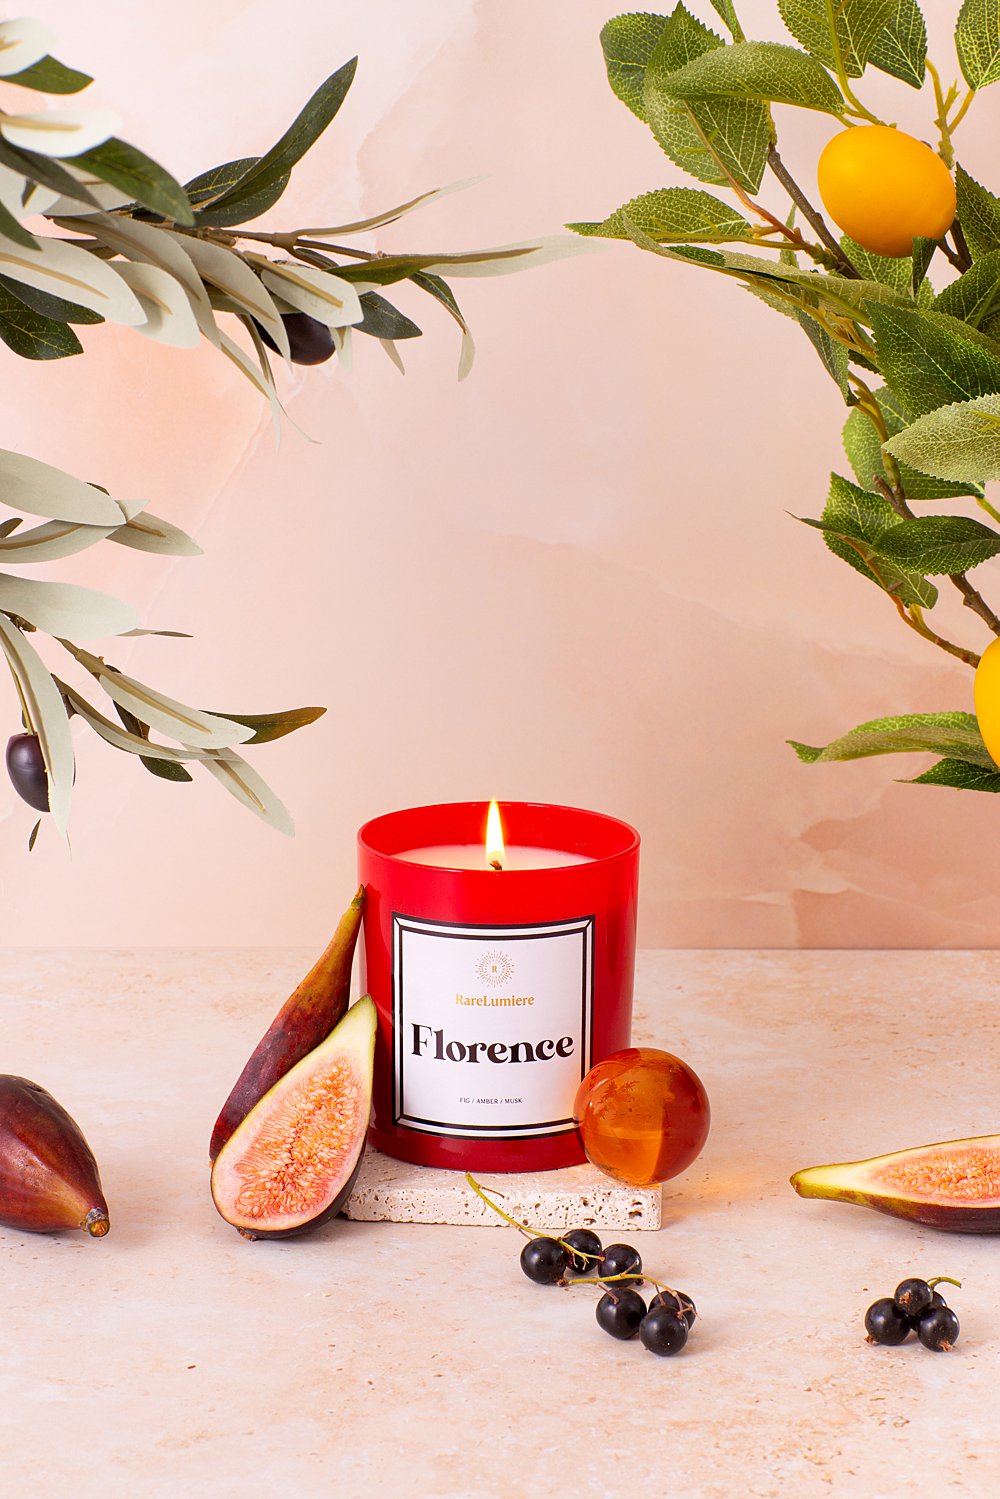 Colourful pretty content creation for Rare Lumiere candles. Styled beauty product stills photography by Marianne Taylor.